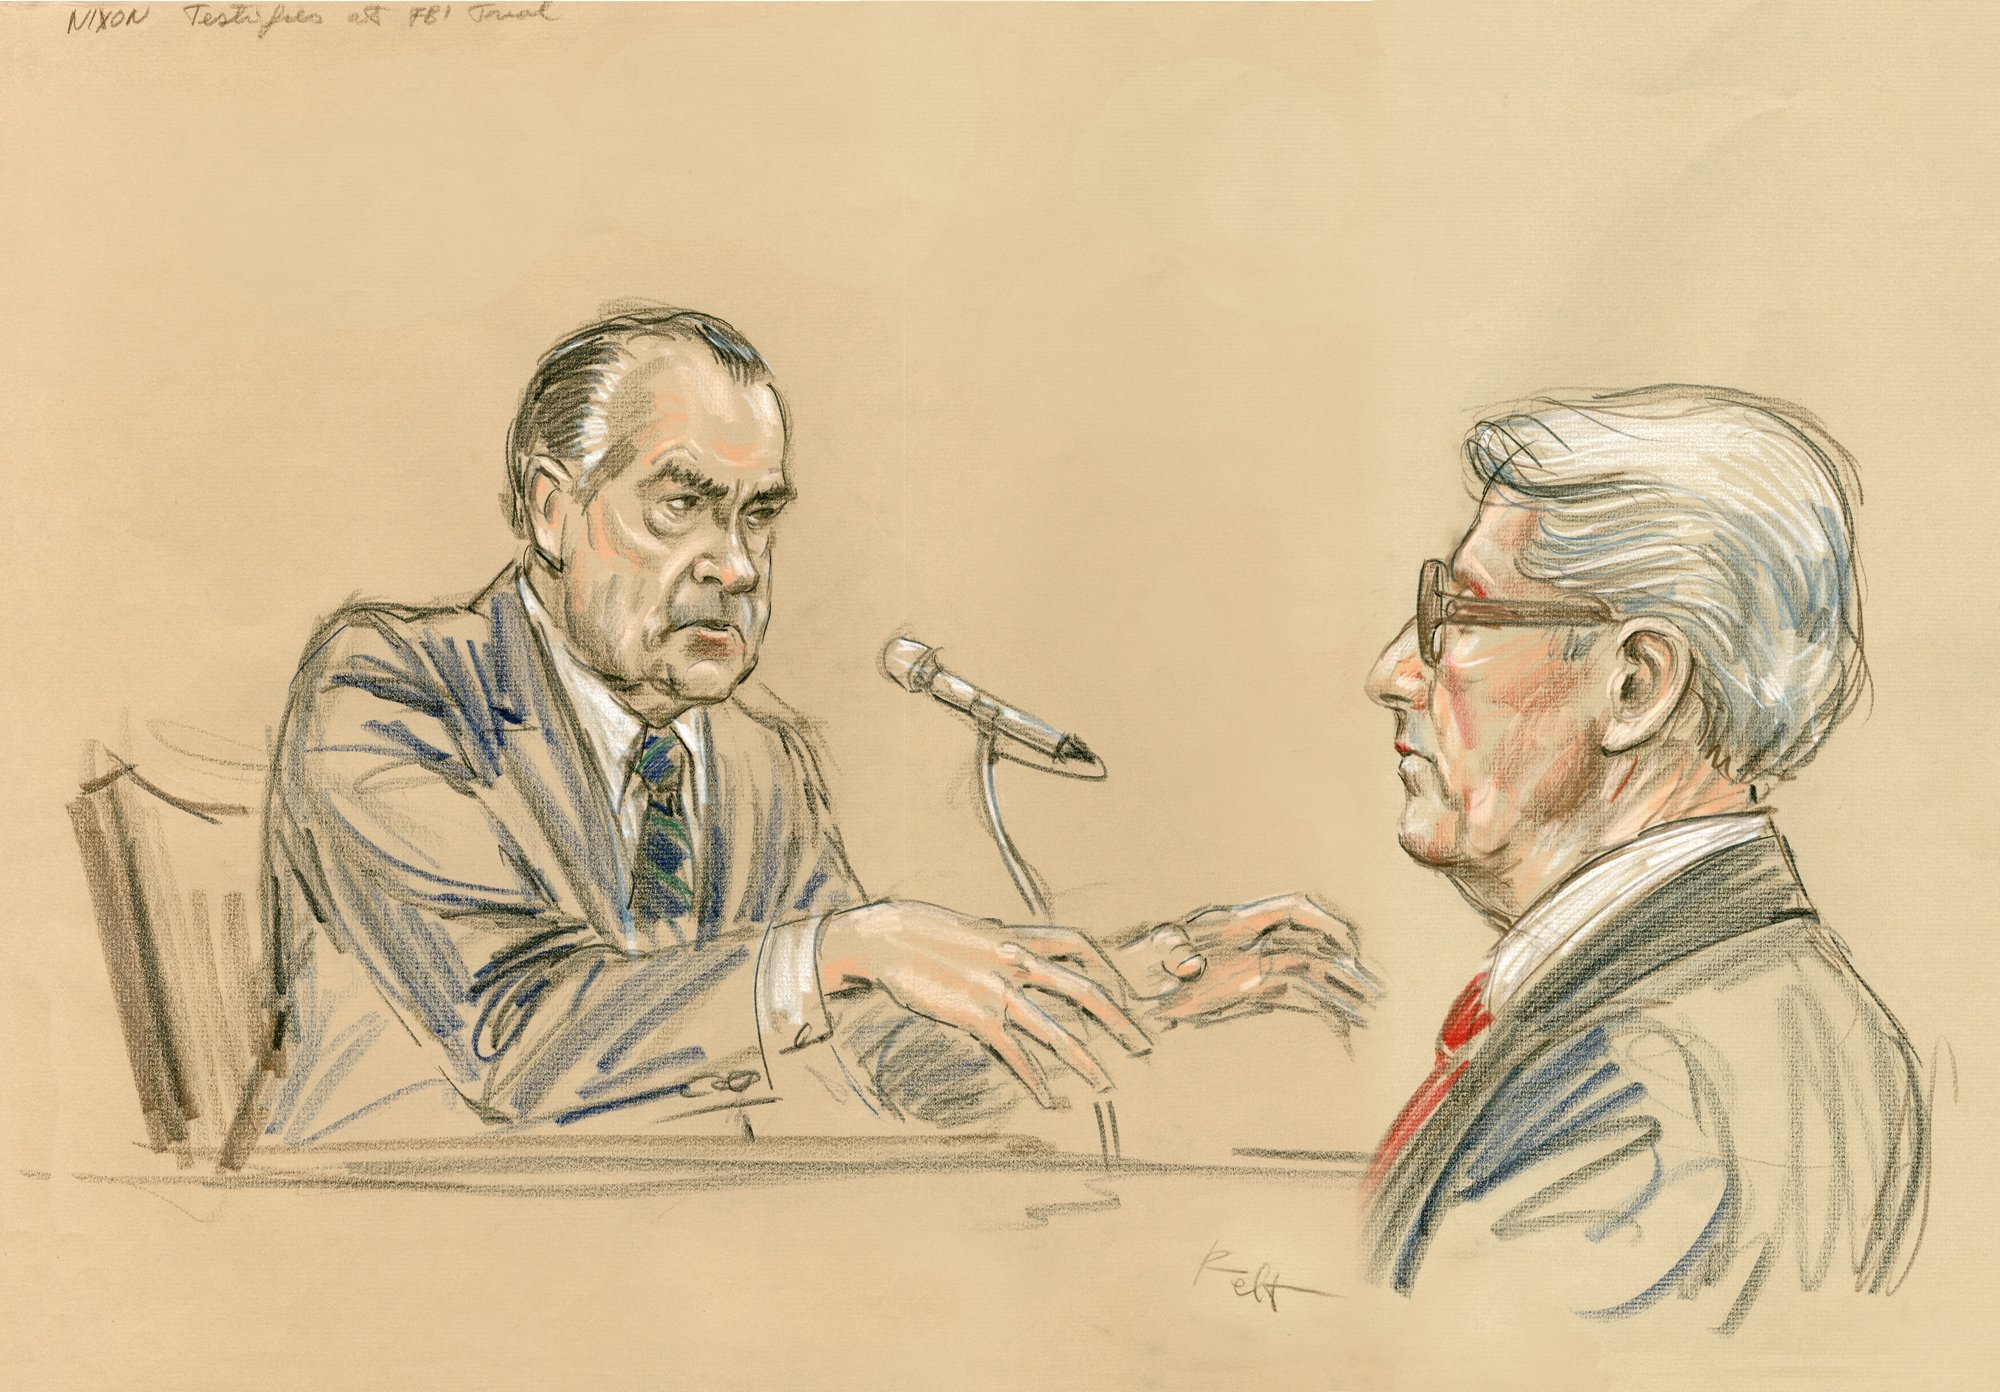 Sketches of famous court cases